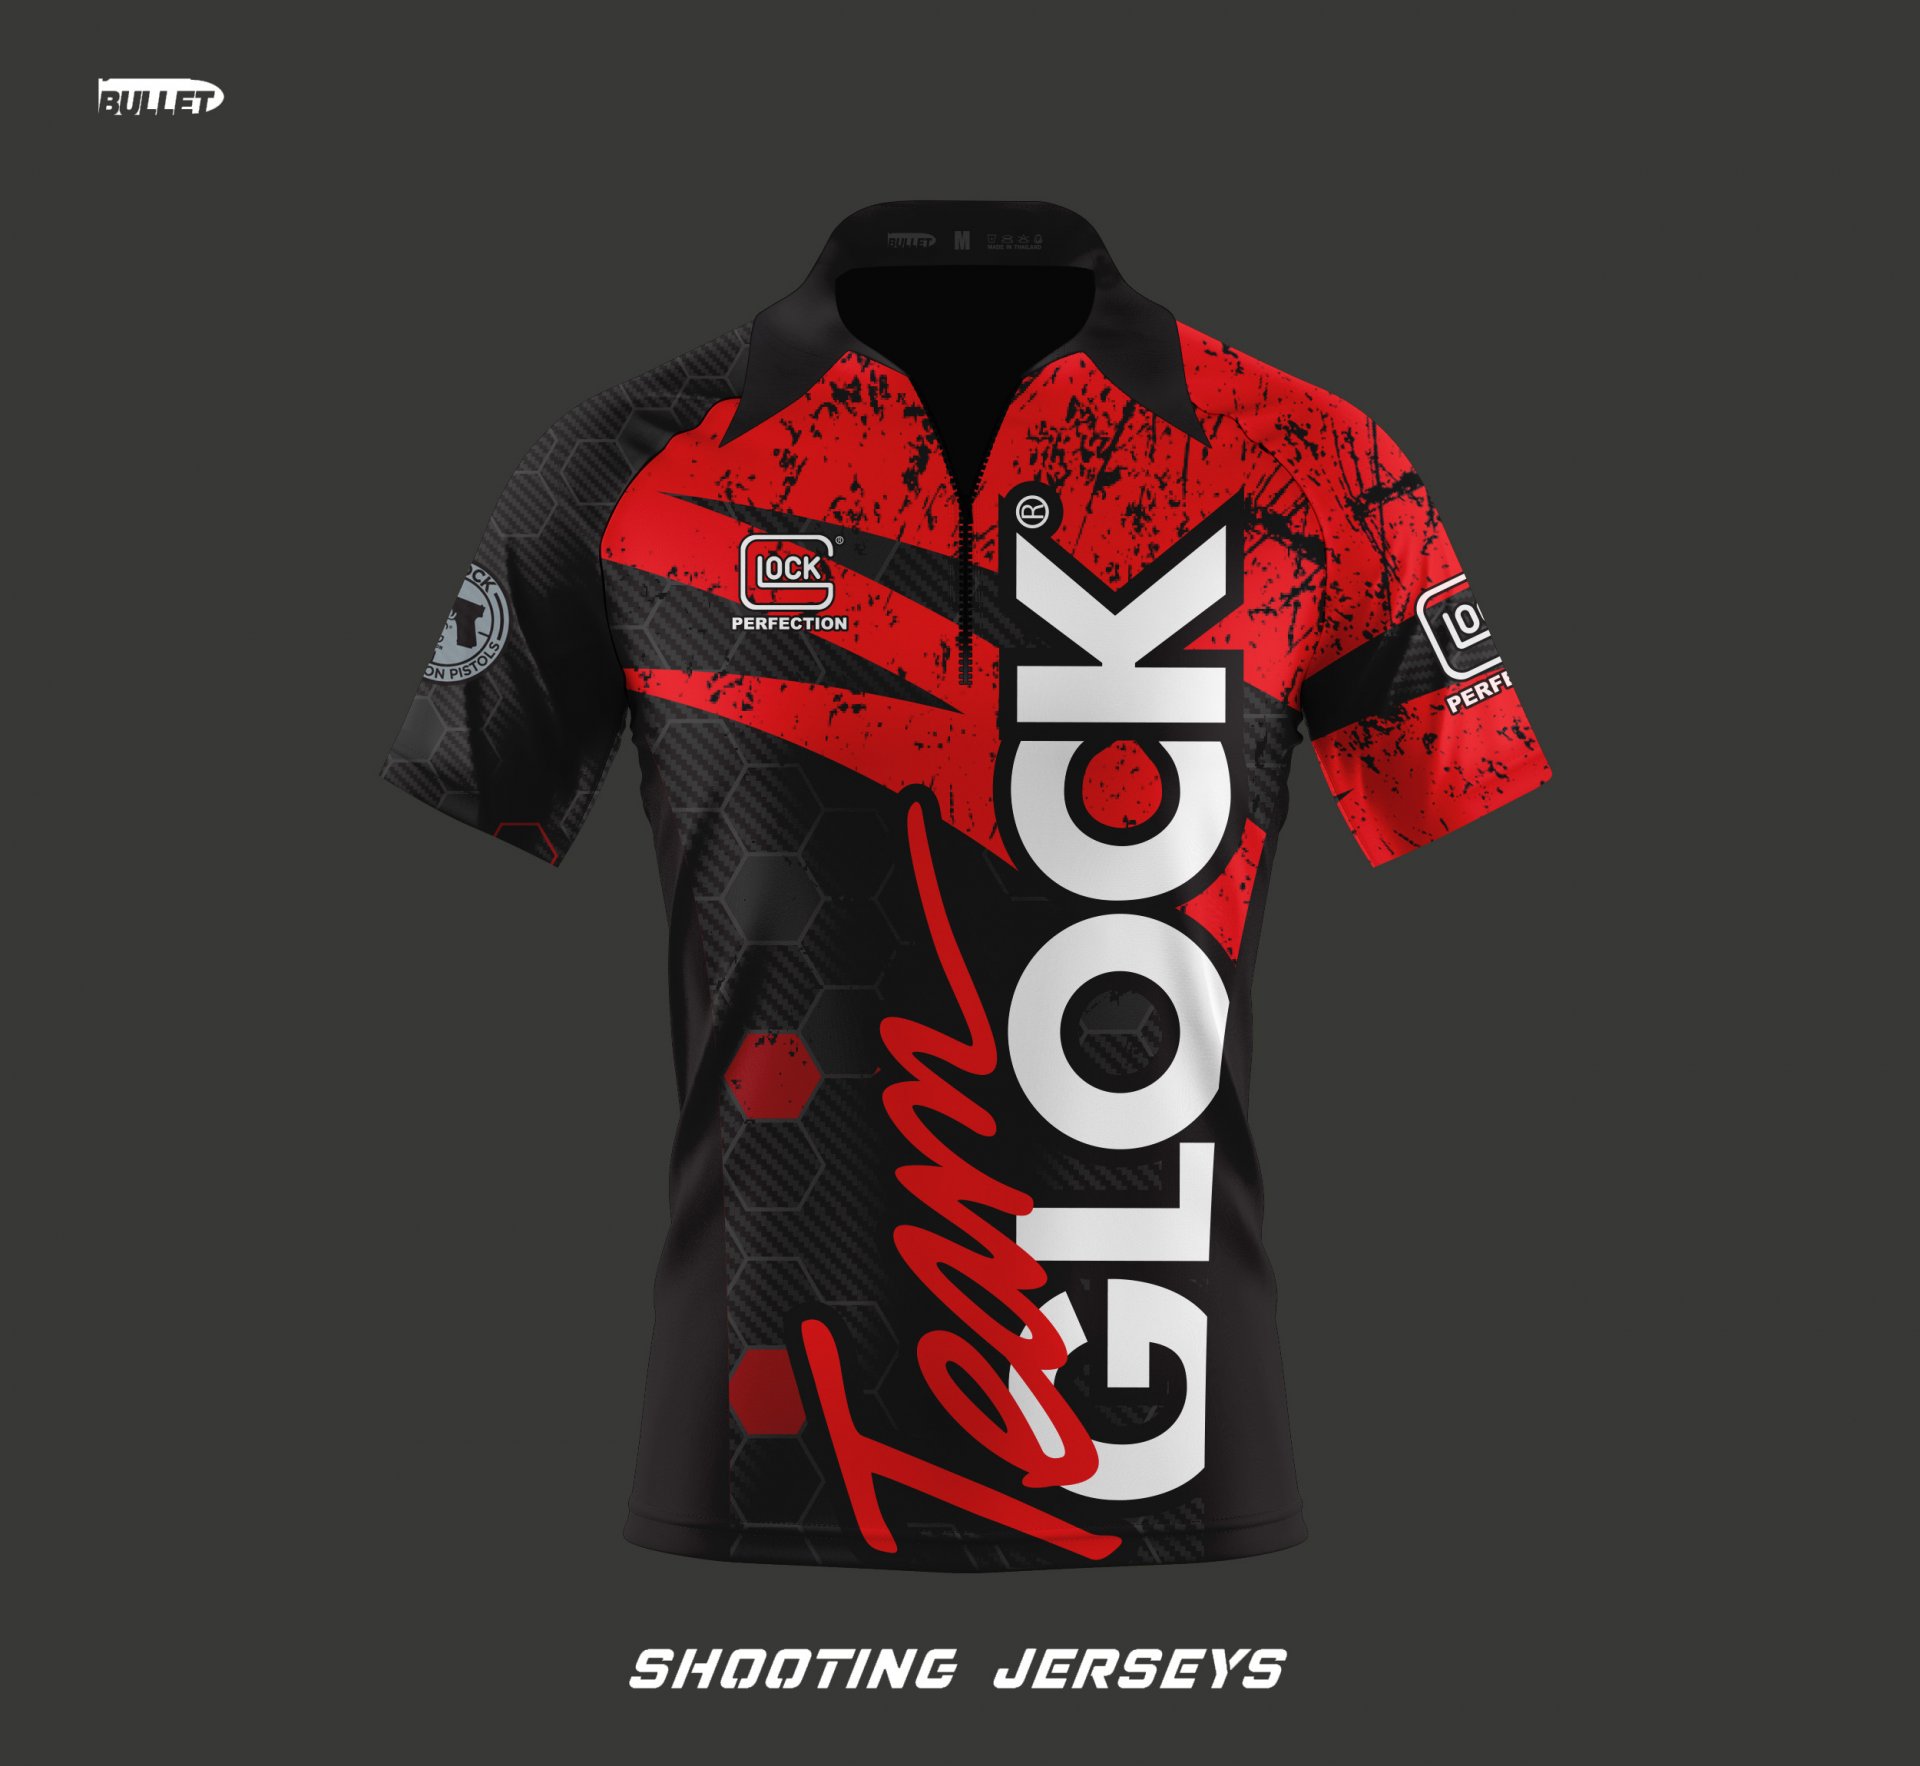 GLOCK-[red]